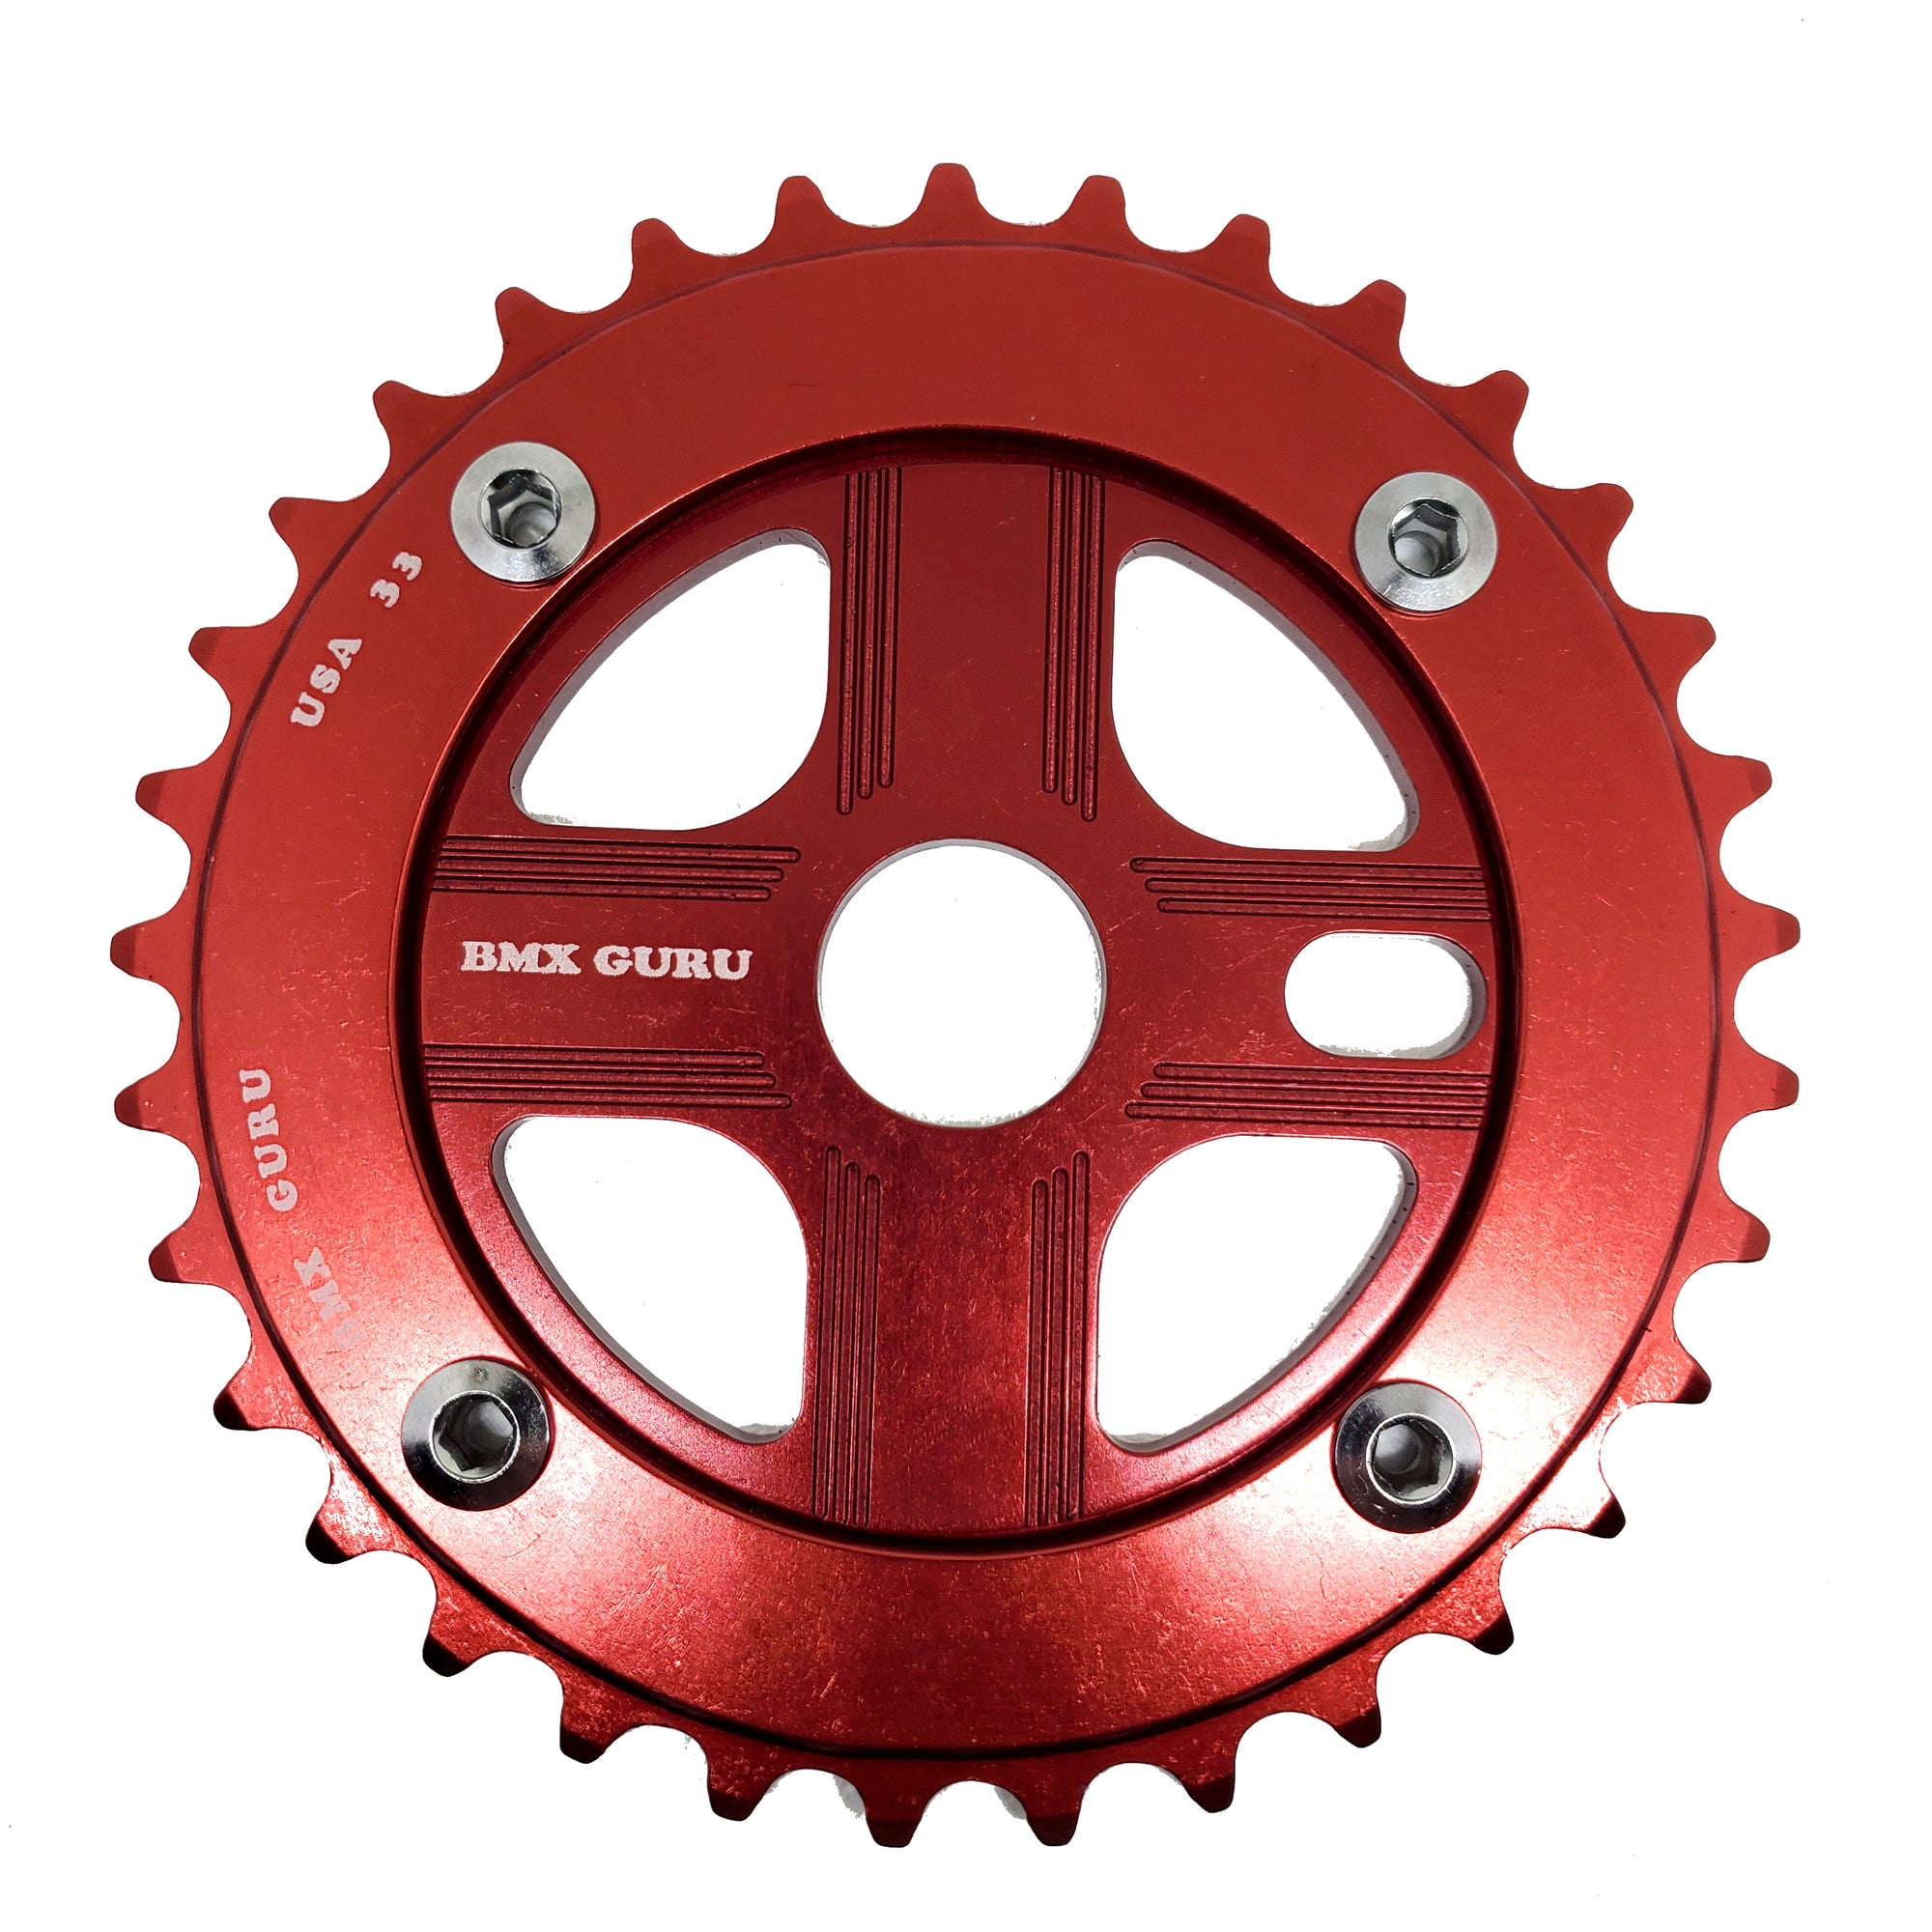 BMXGuru 33T Aluminum Spider & 4-bolt Chainring Combo - Red over Red - USA Made